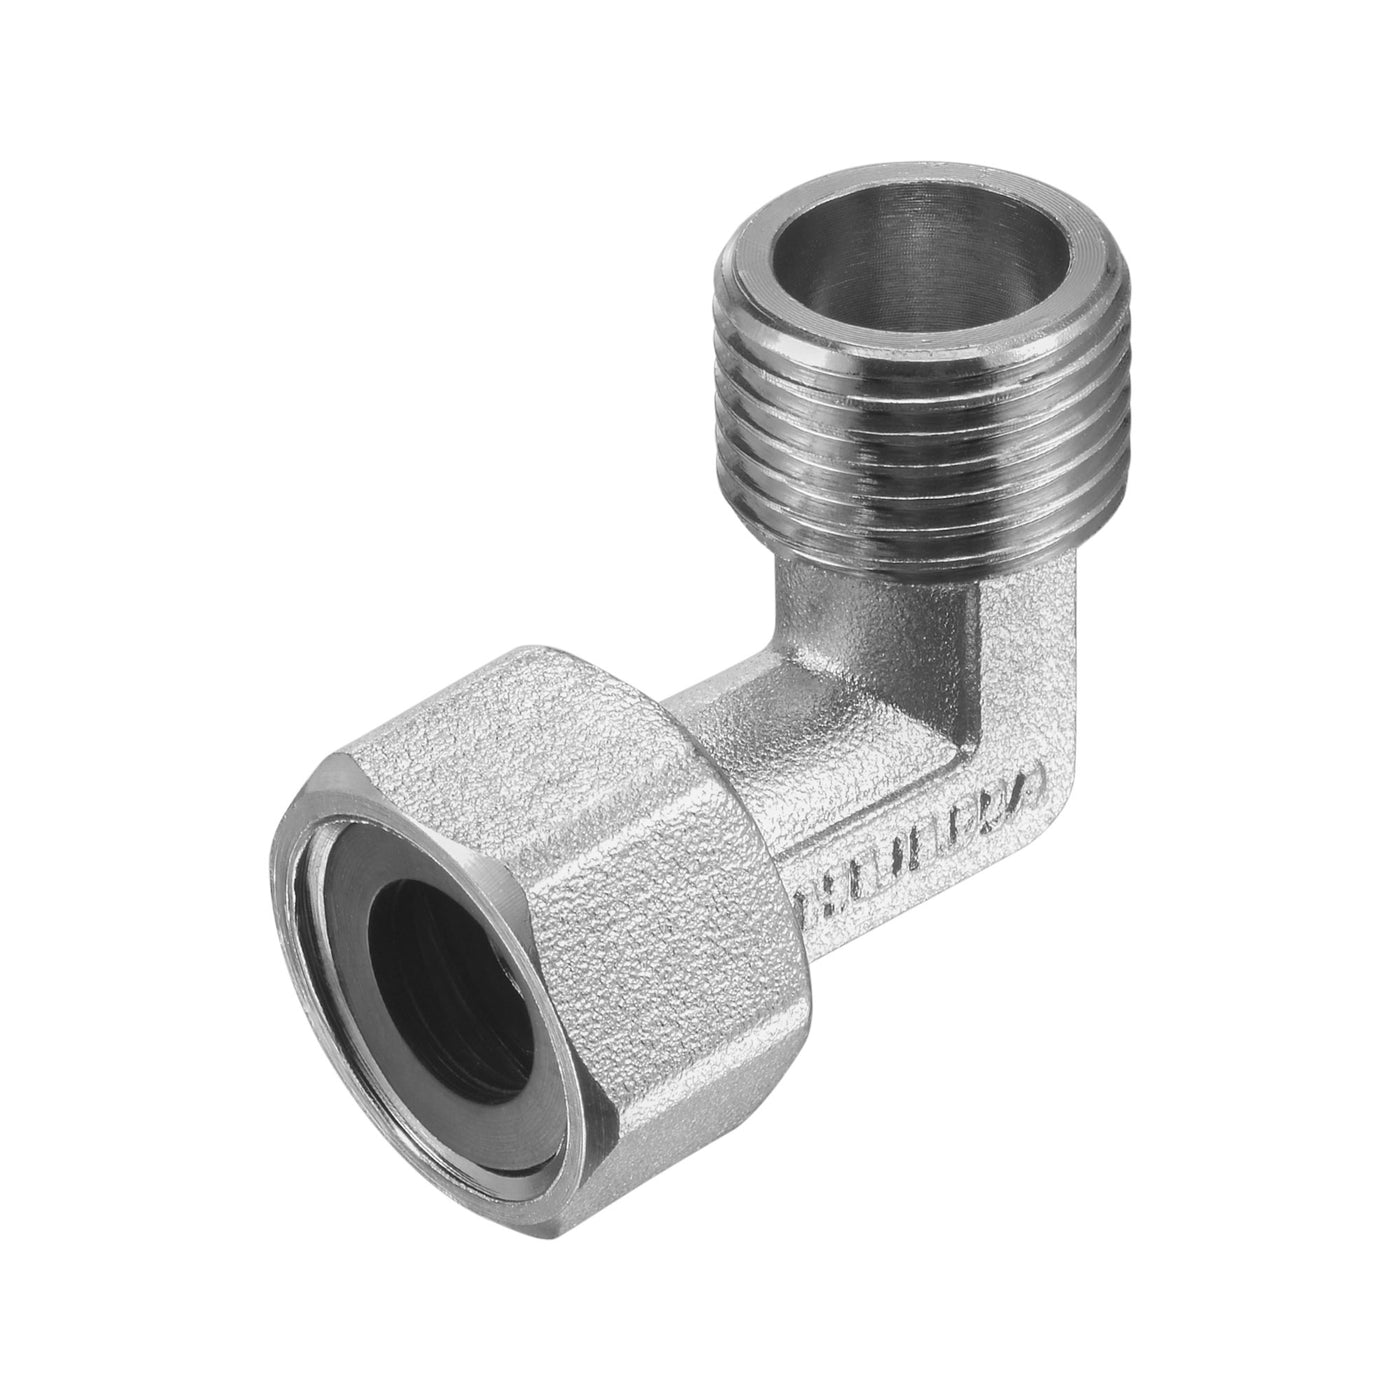 Uxcell Brass Compression Tube Fitting 6mm Tube OD to 1/8PT Male